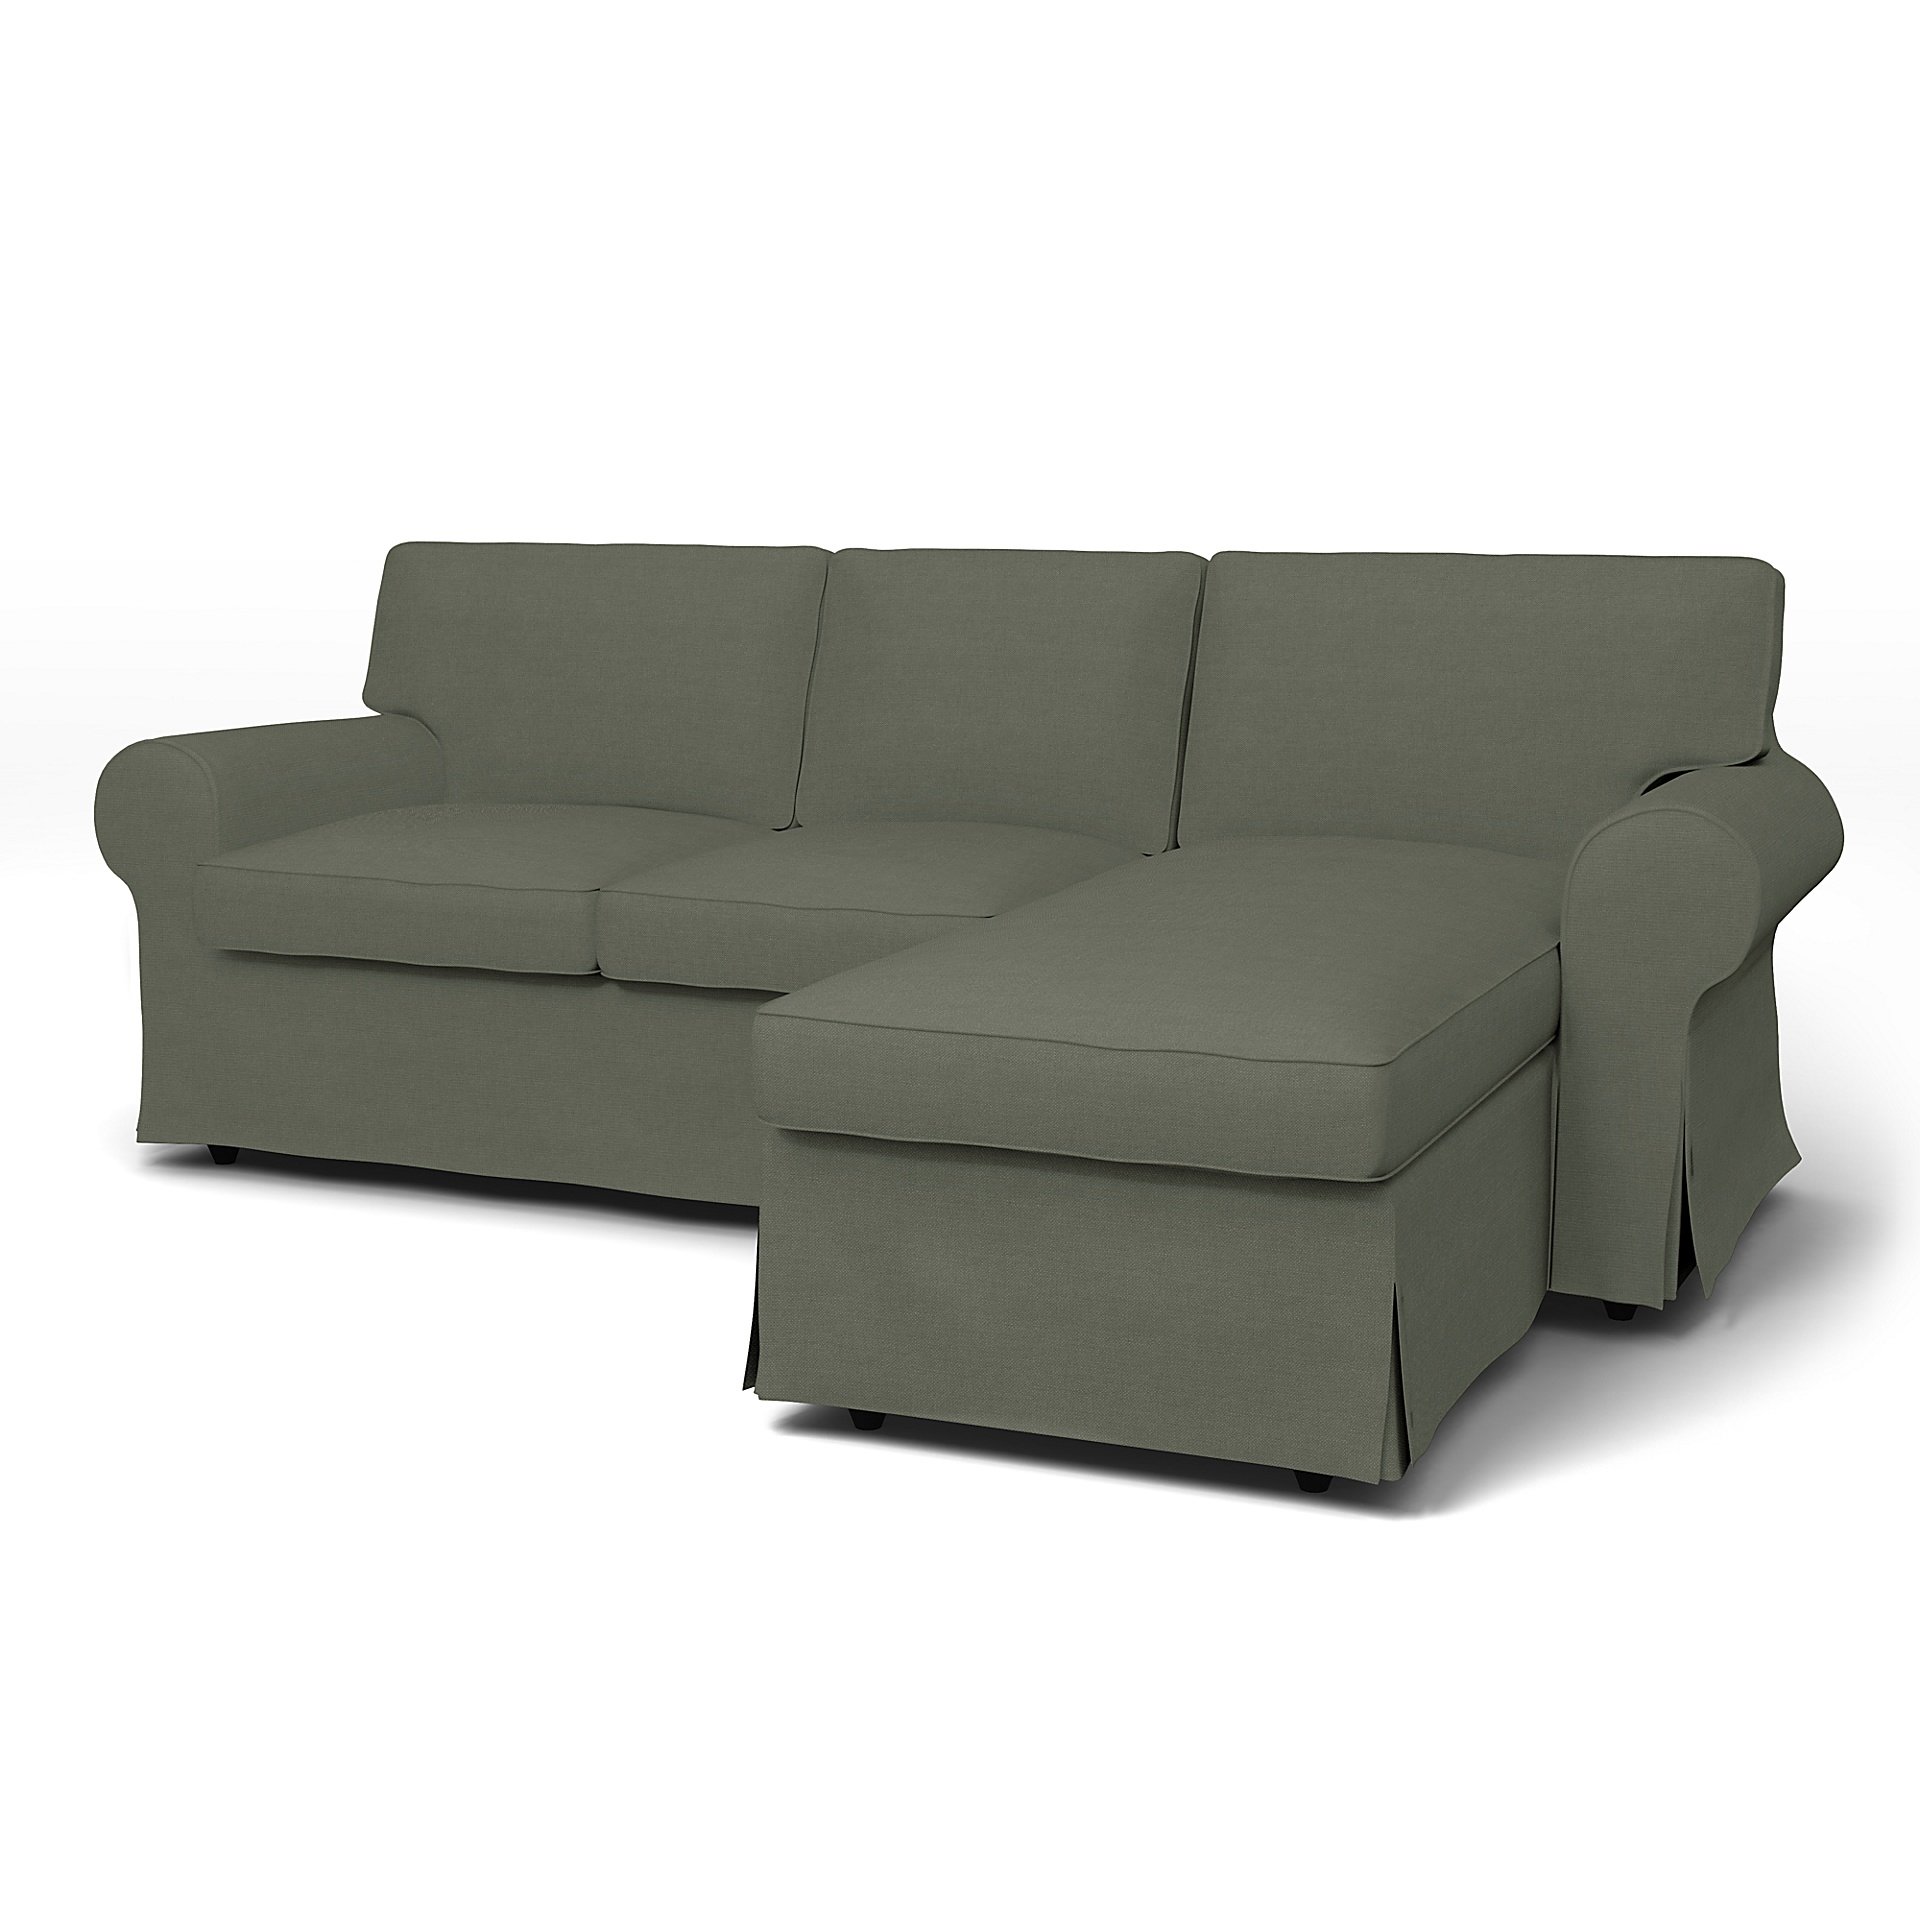 IKEA - Ektorp 3 Seater Sofa with Chaise Cover, Rosemary, Linen - Bemz